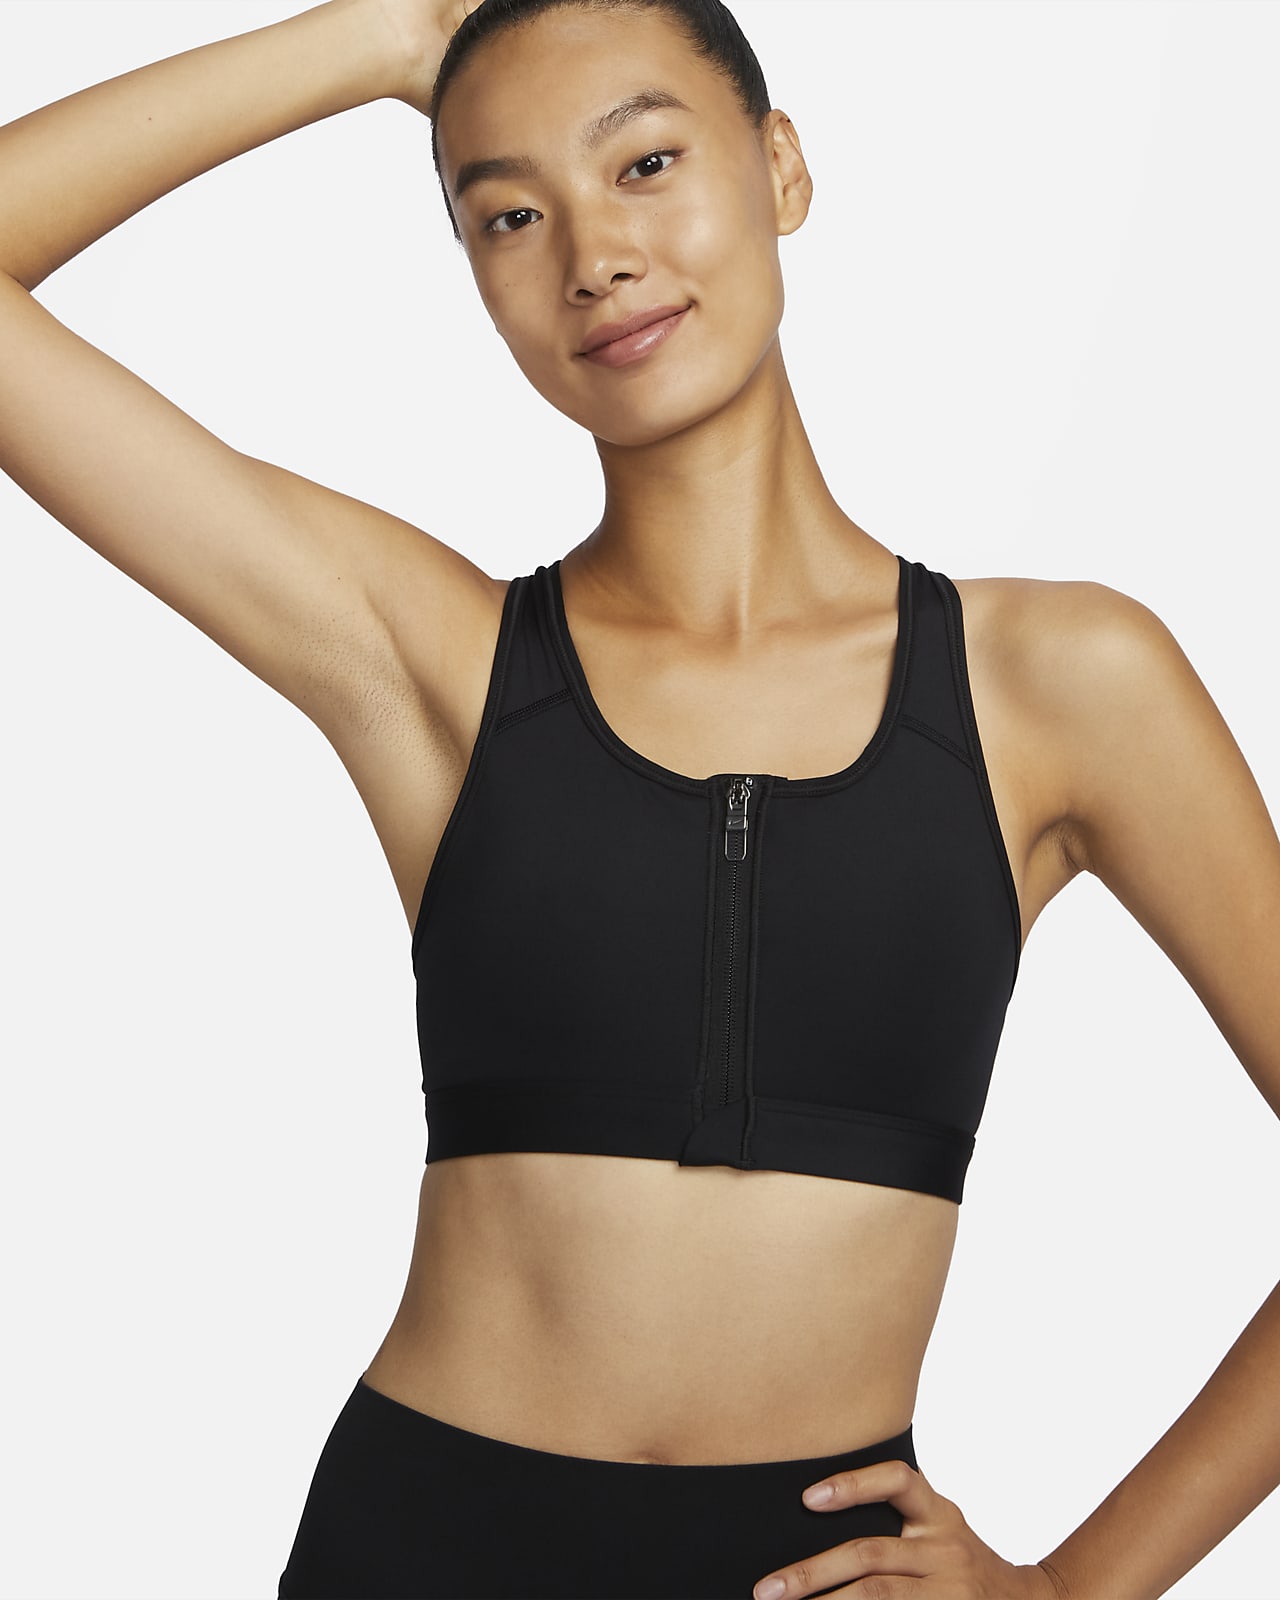 Nike Black Small Womens Zip-Up Front Sports Bra Vintage Compression